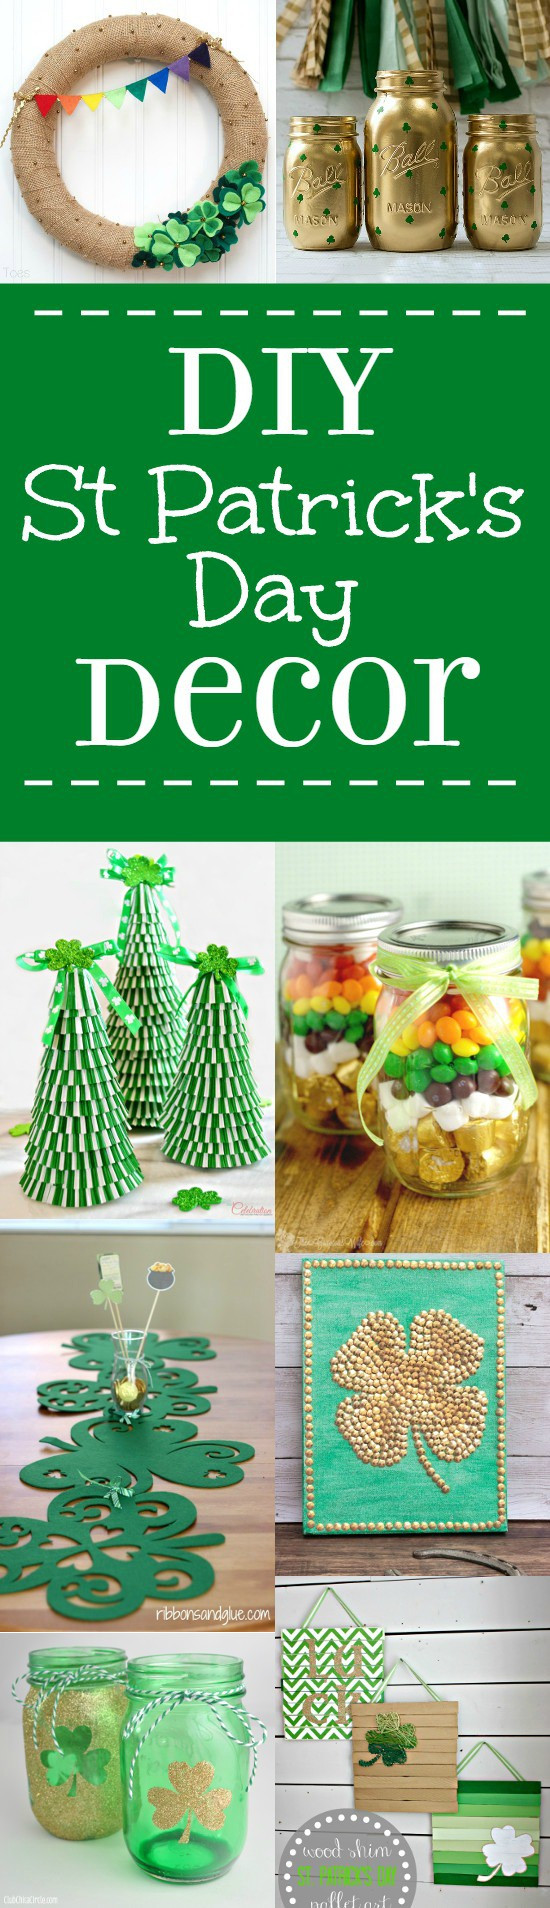 St Patrick's Day Party Ideas
 28 DIY St Patrick s Day Decorations